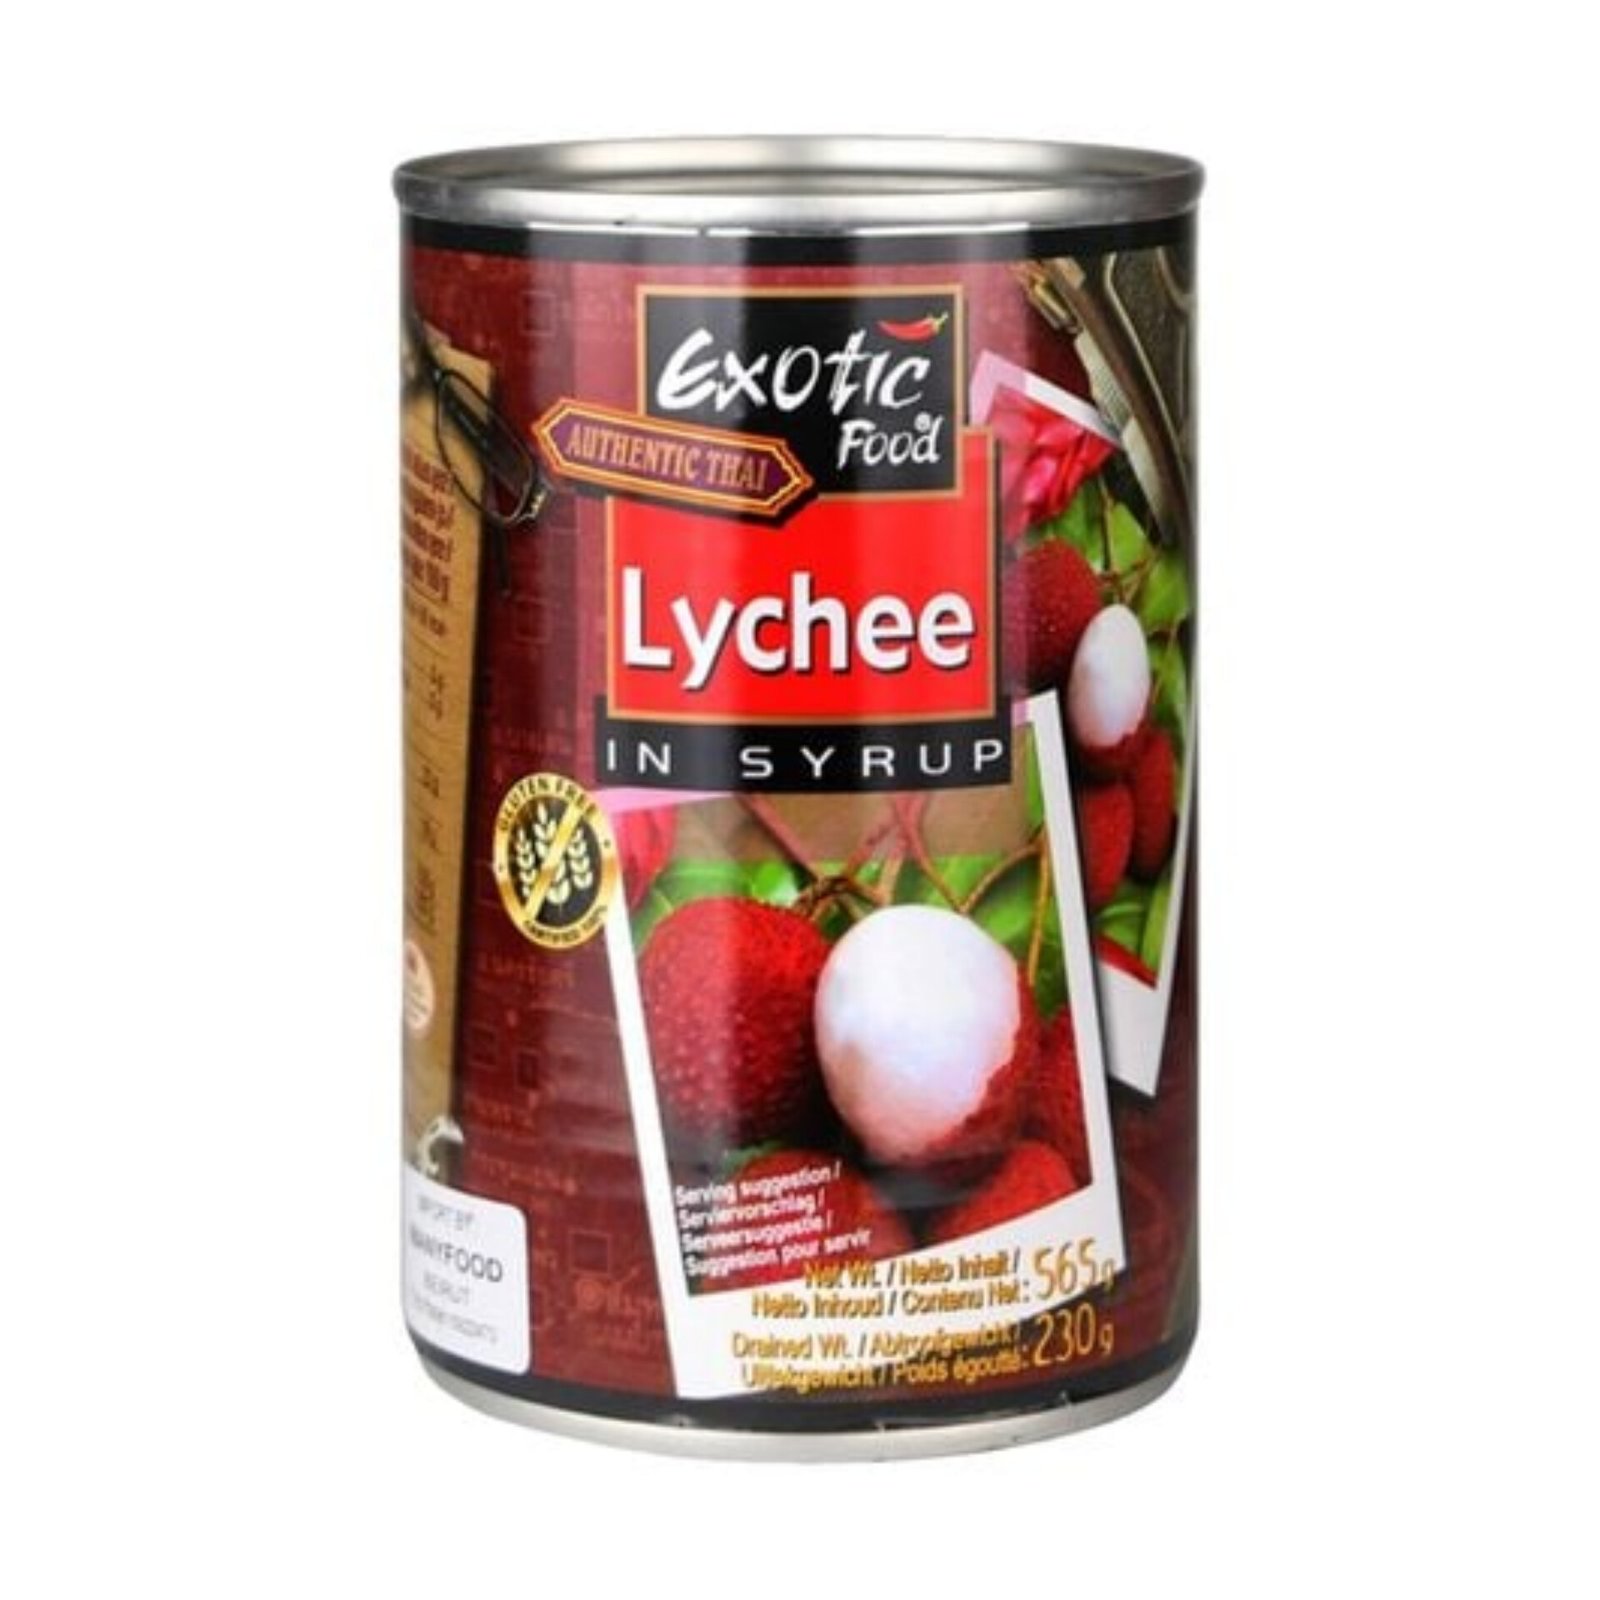 Lychee in Syrup 565g Exotic Food